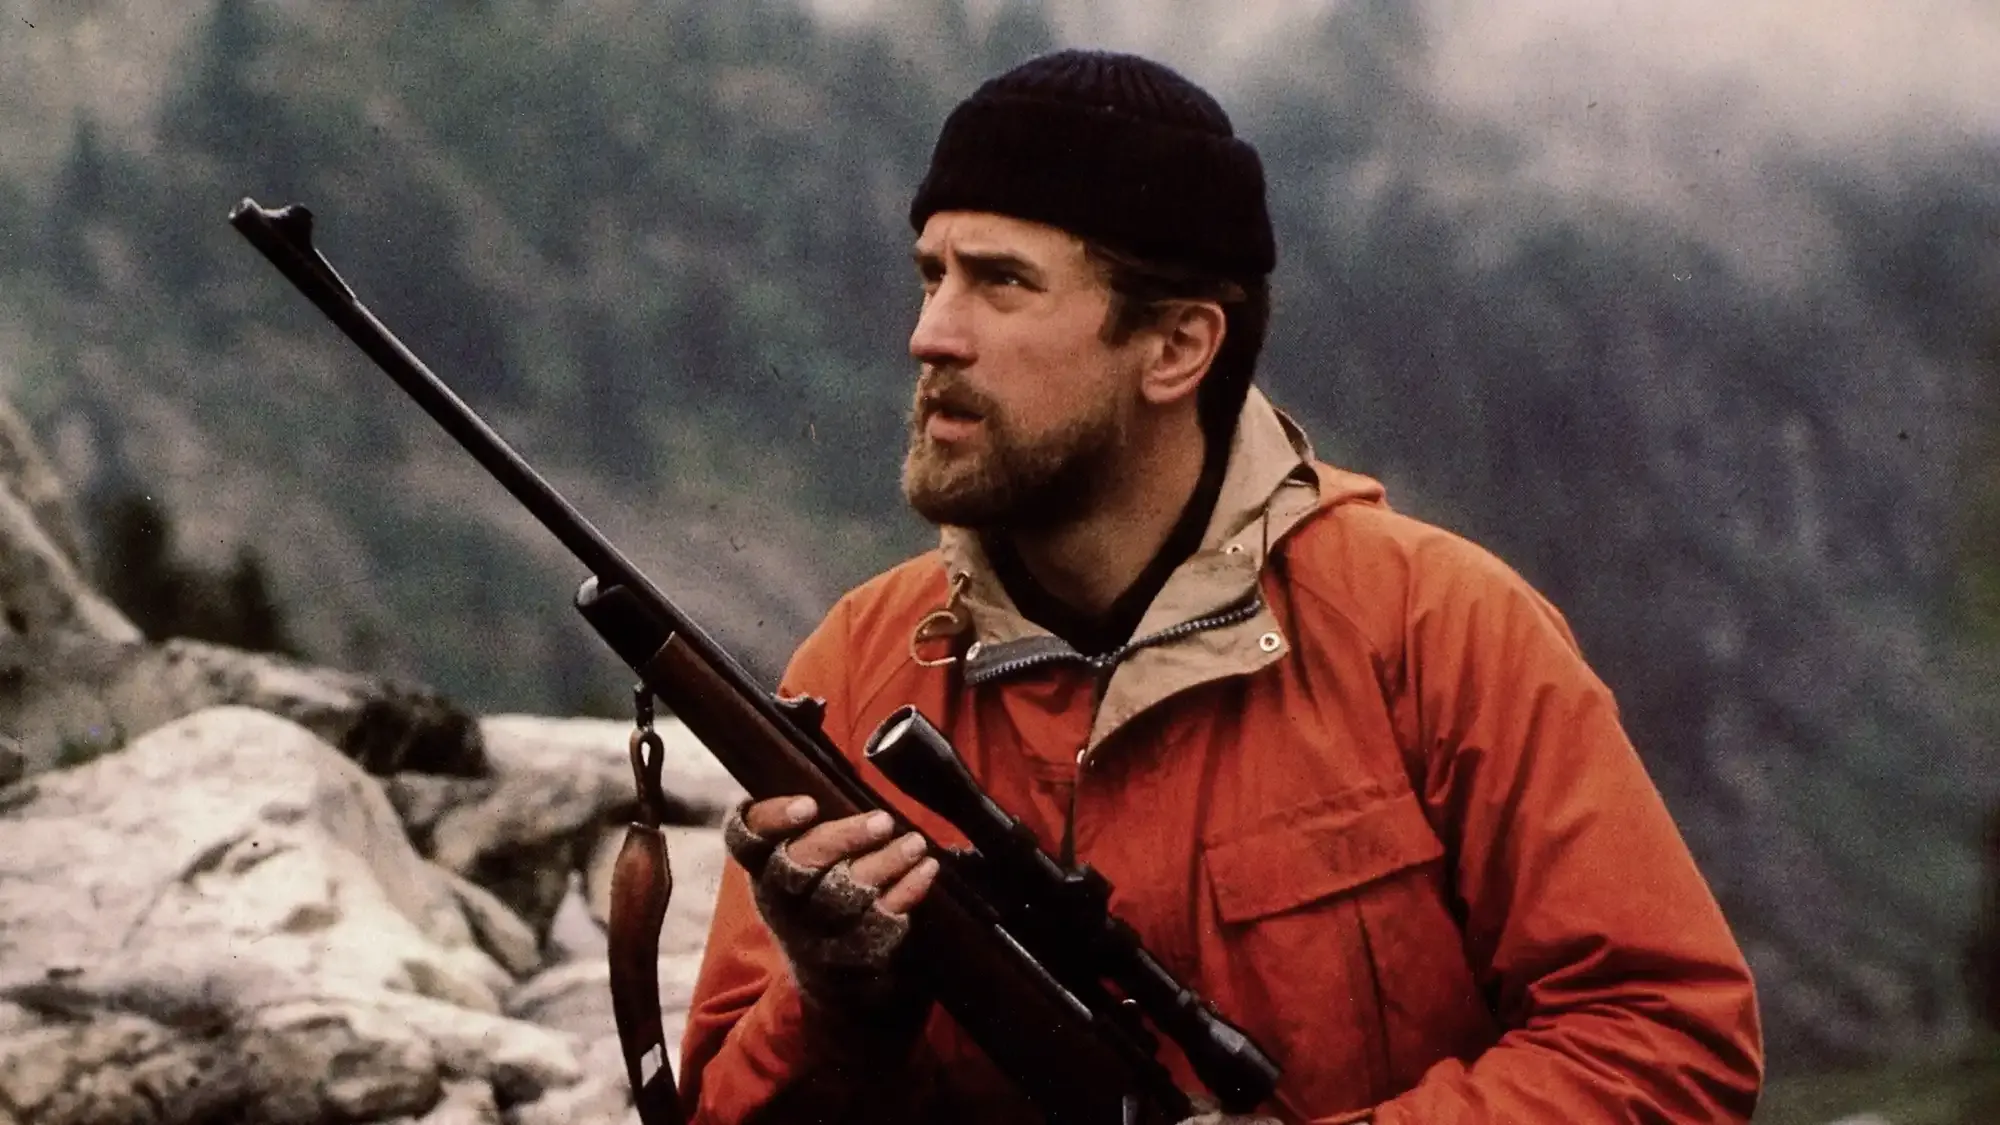 The Deer Hunter movie review